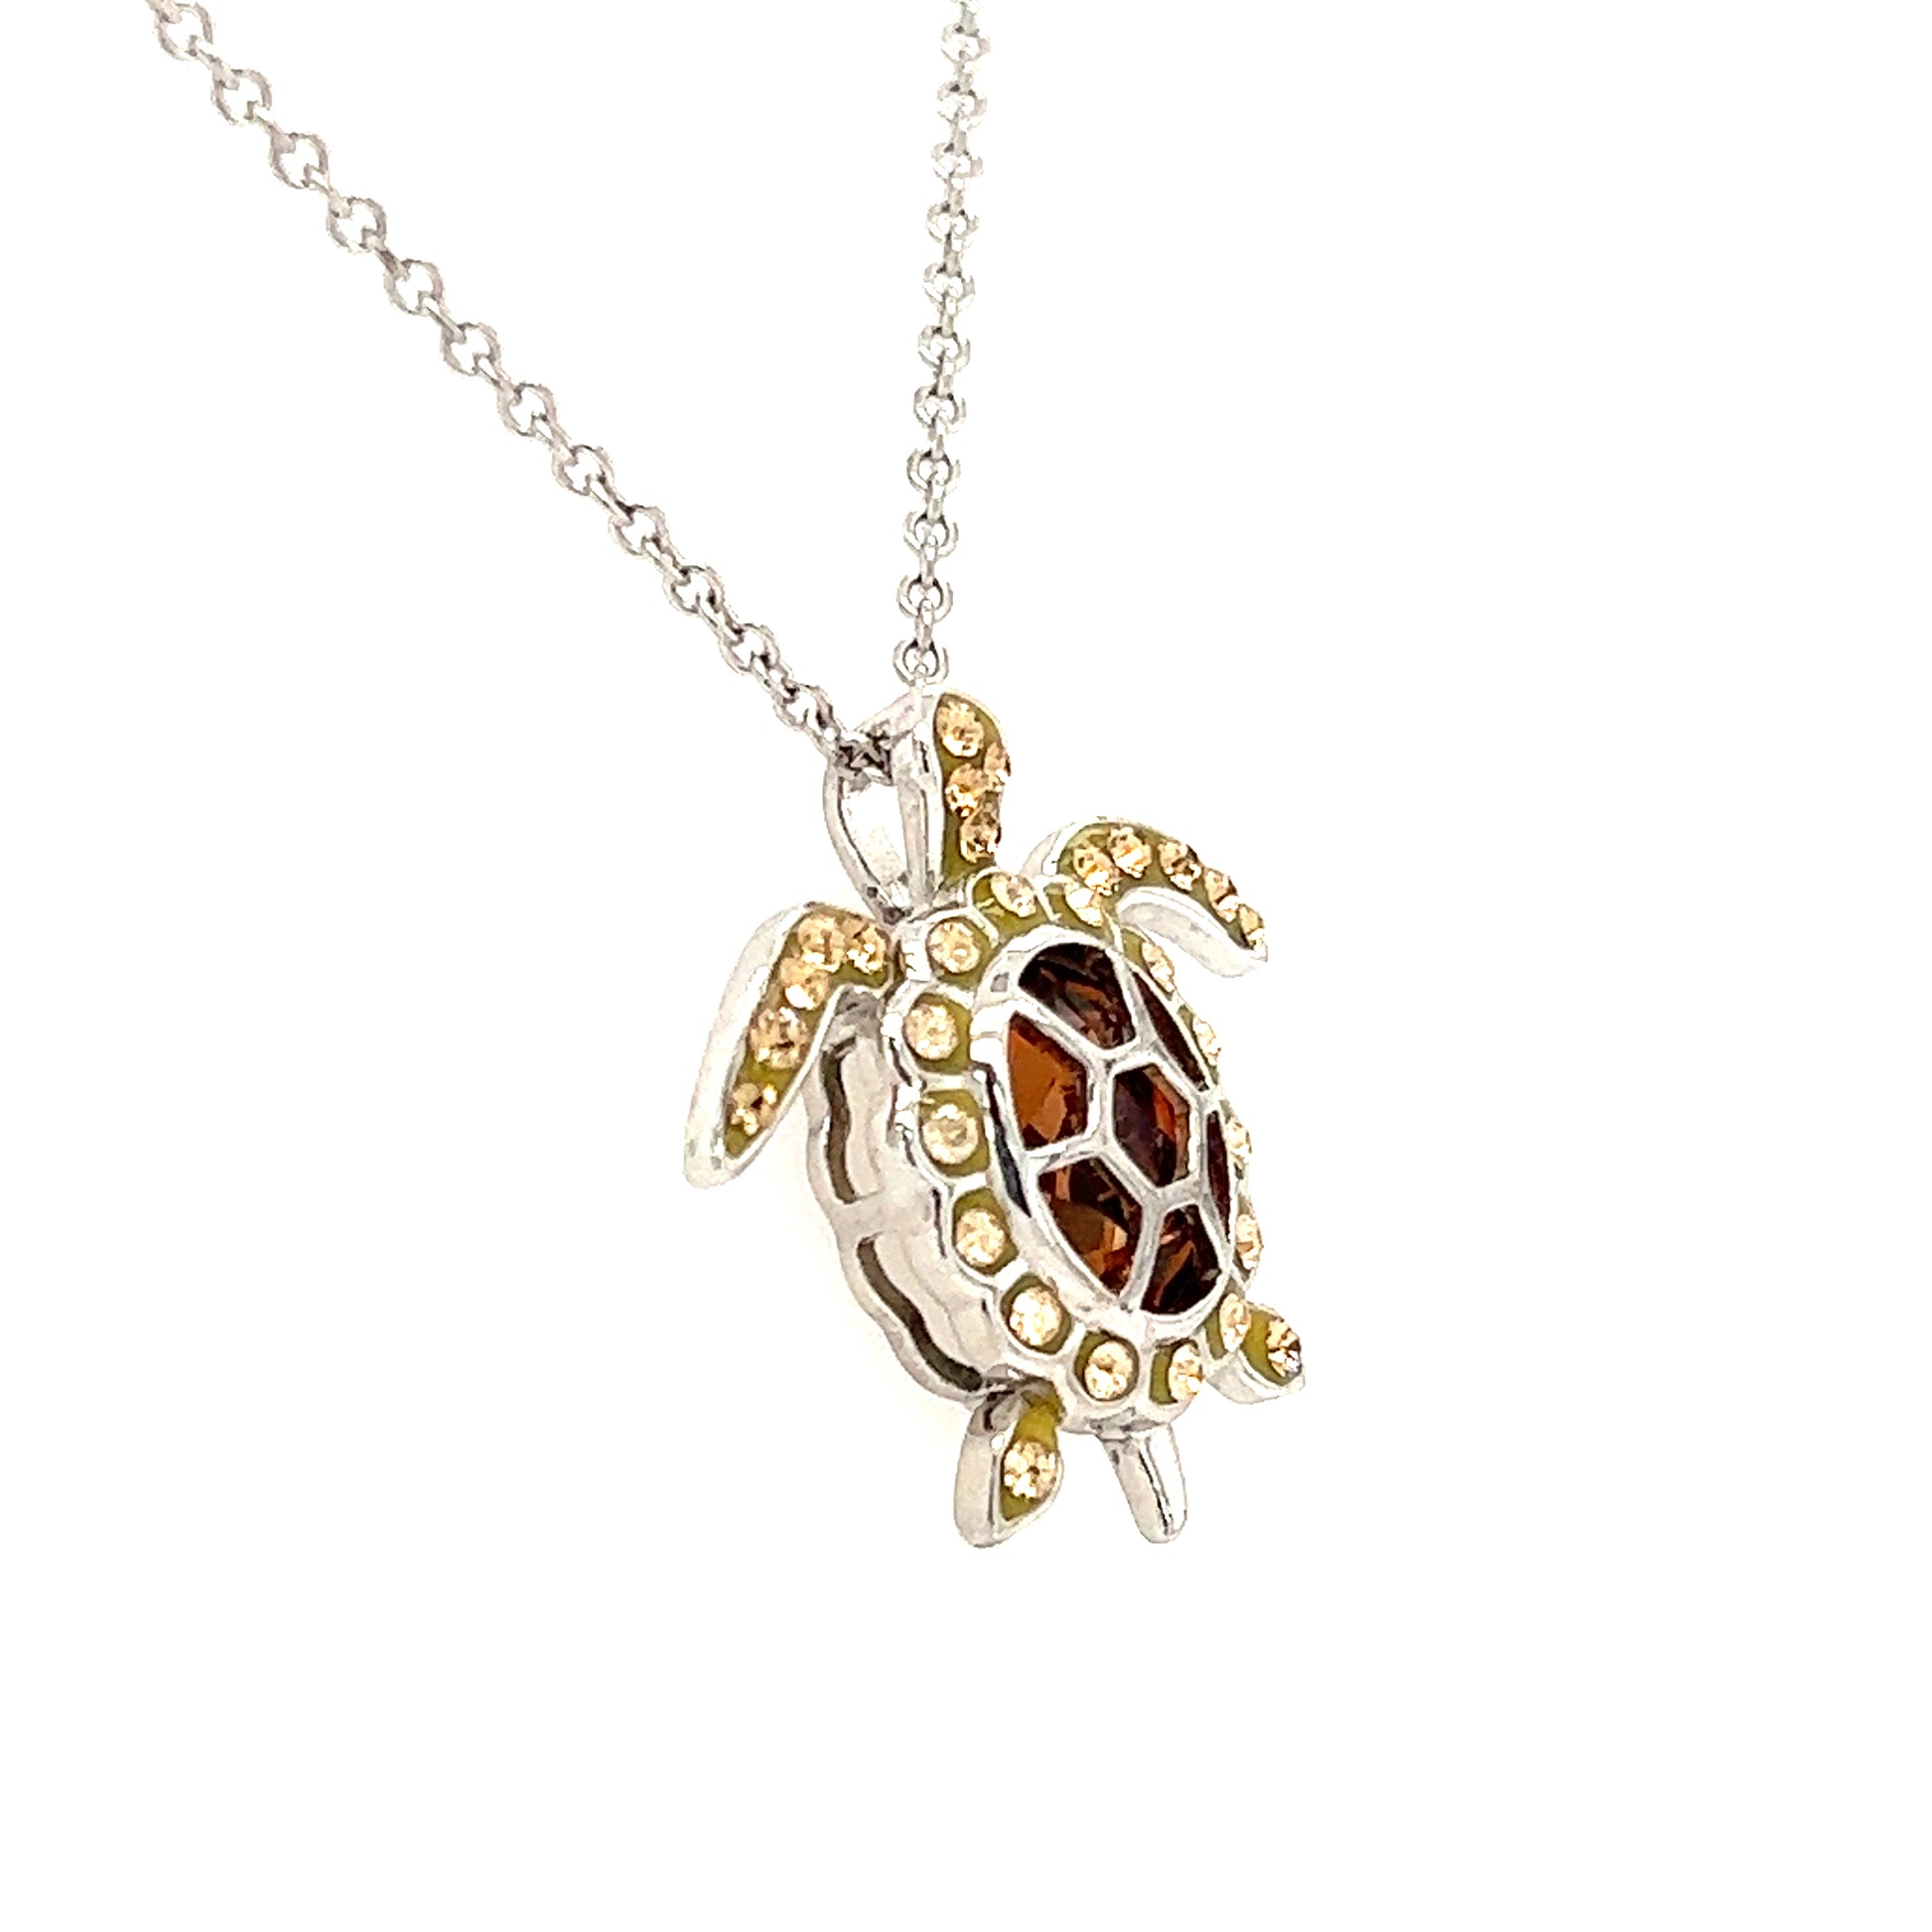 Sea Turtle Necklace with Yellow and White Crystals in Sterling Silver. Left Side View